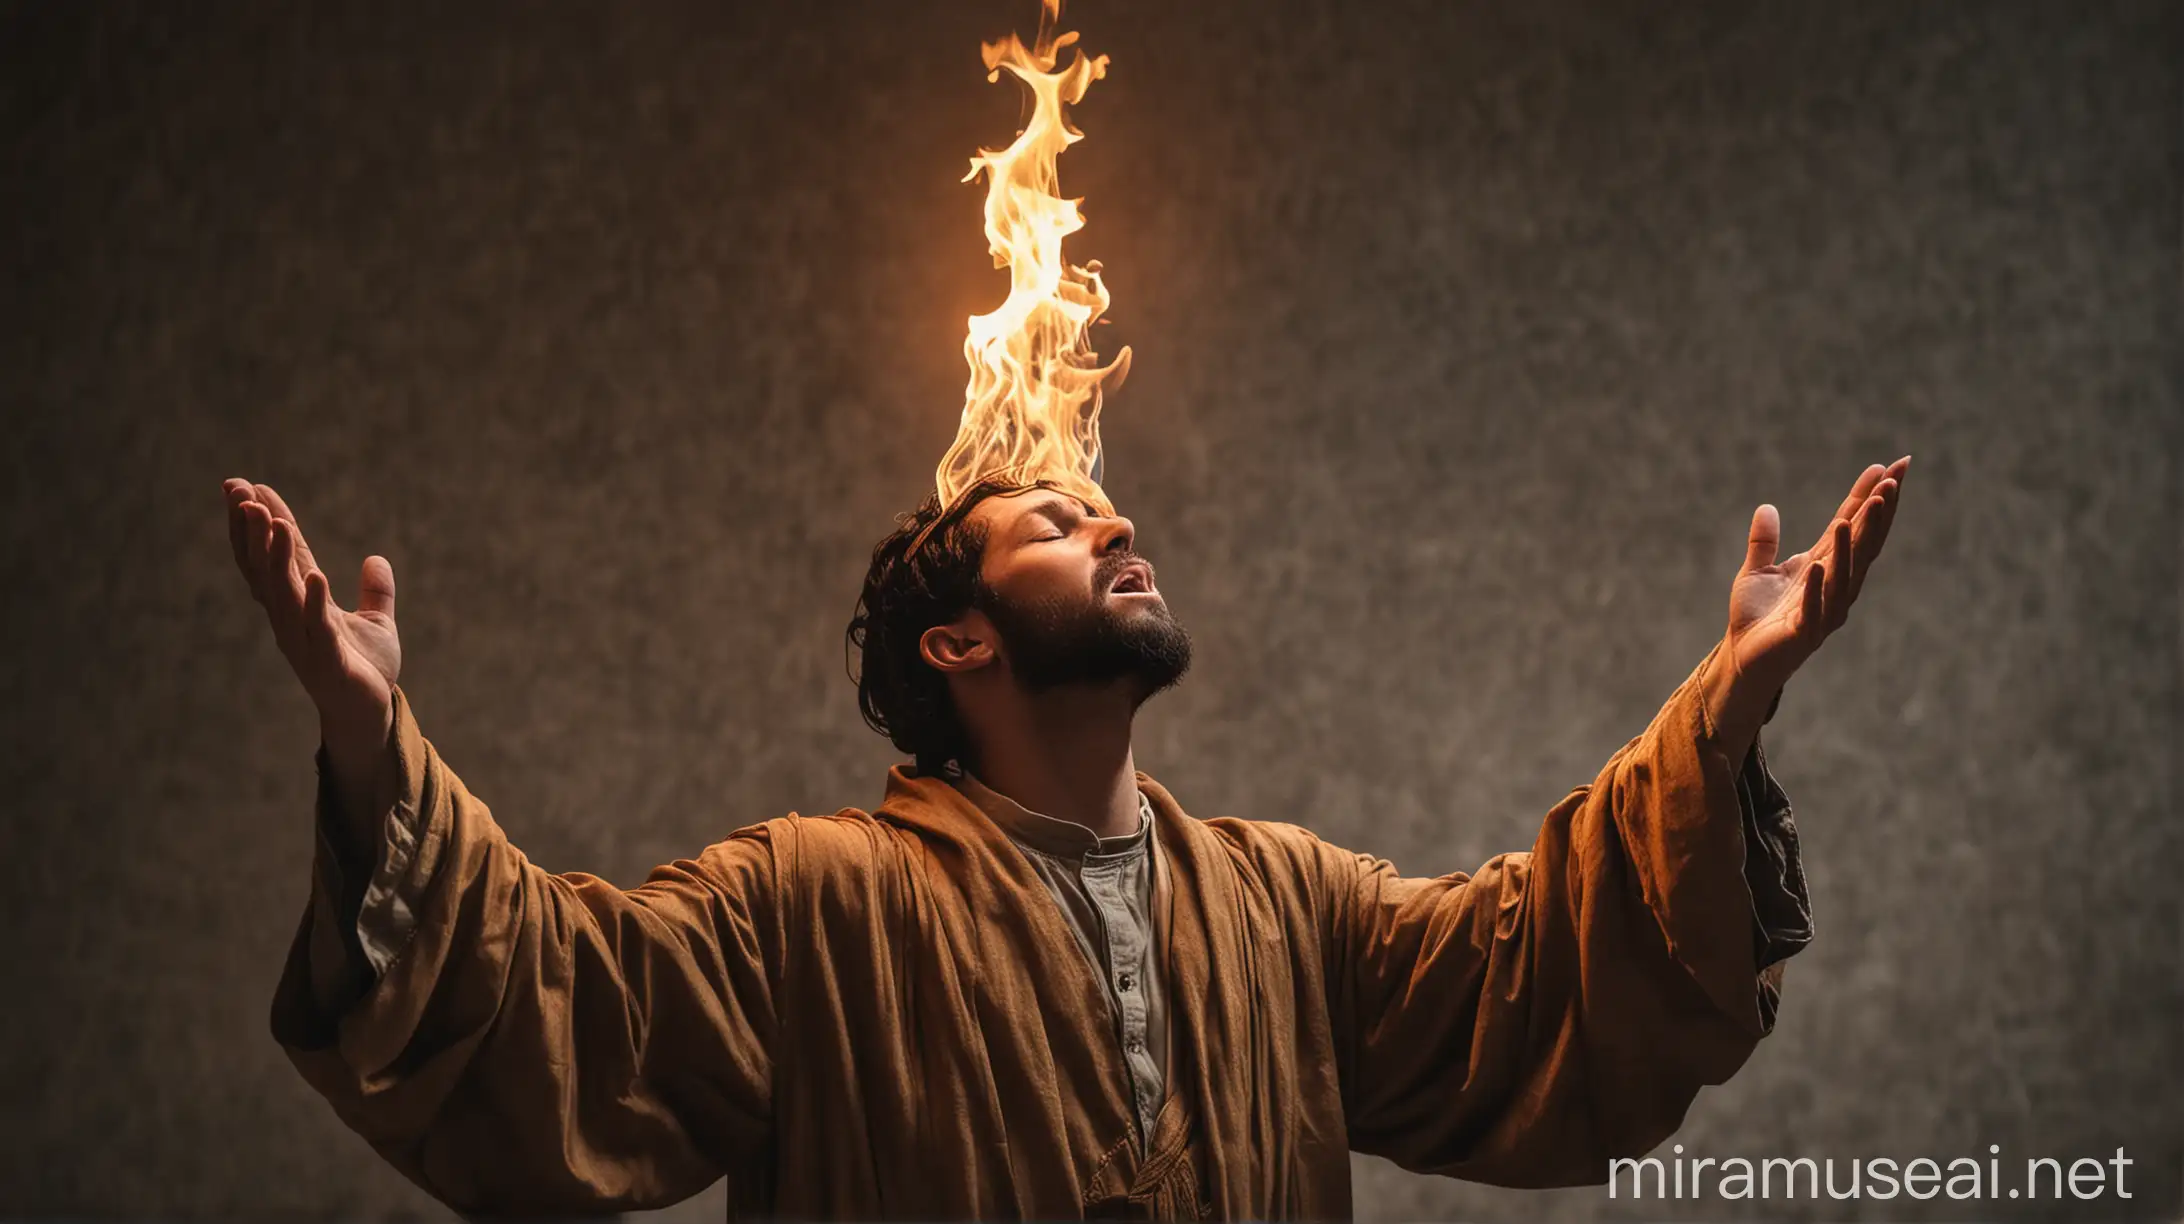 one person worshipping God. their is a flame of fire on his head. he is dressed like someone from the bible.